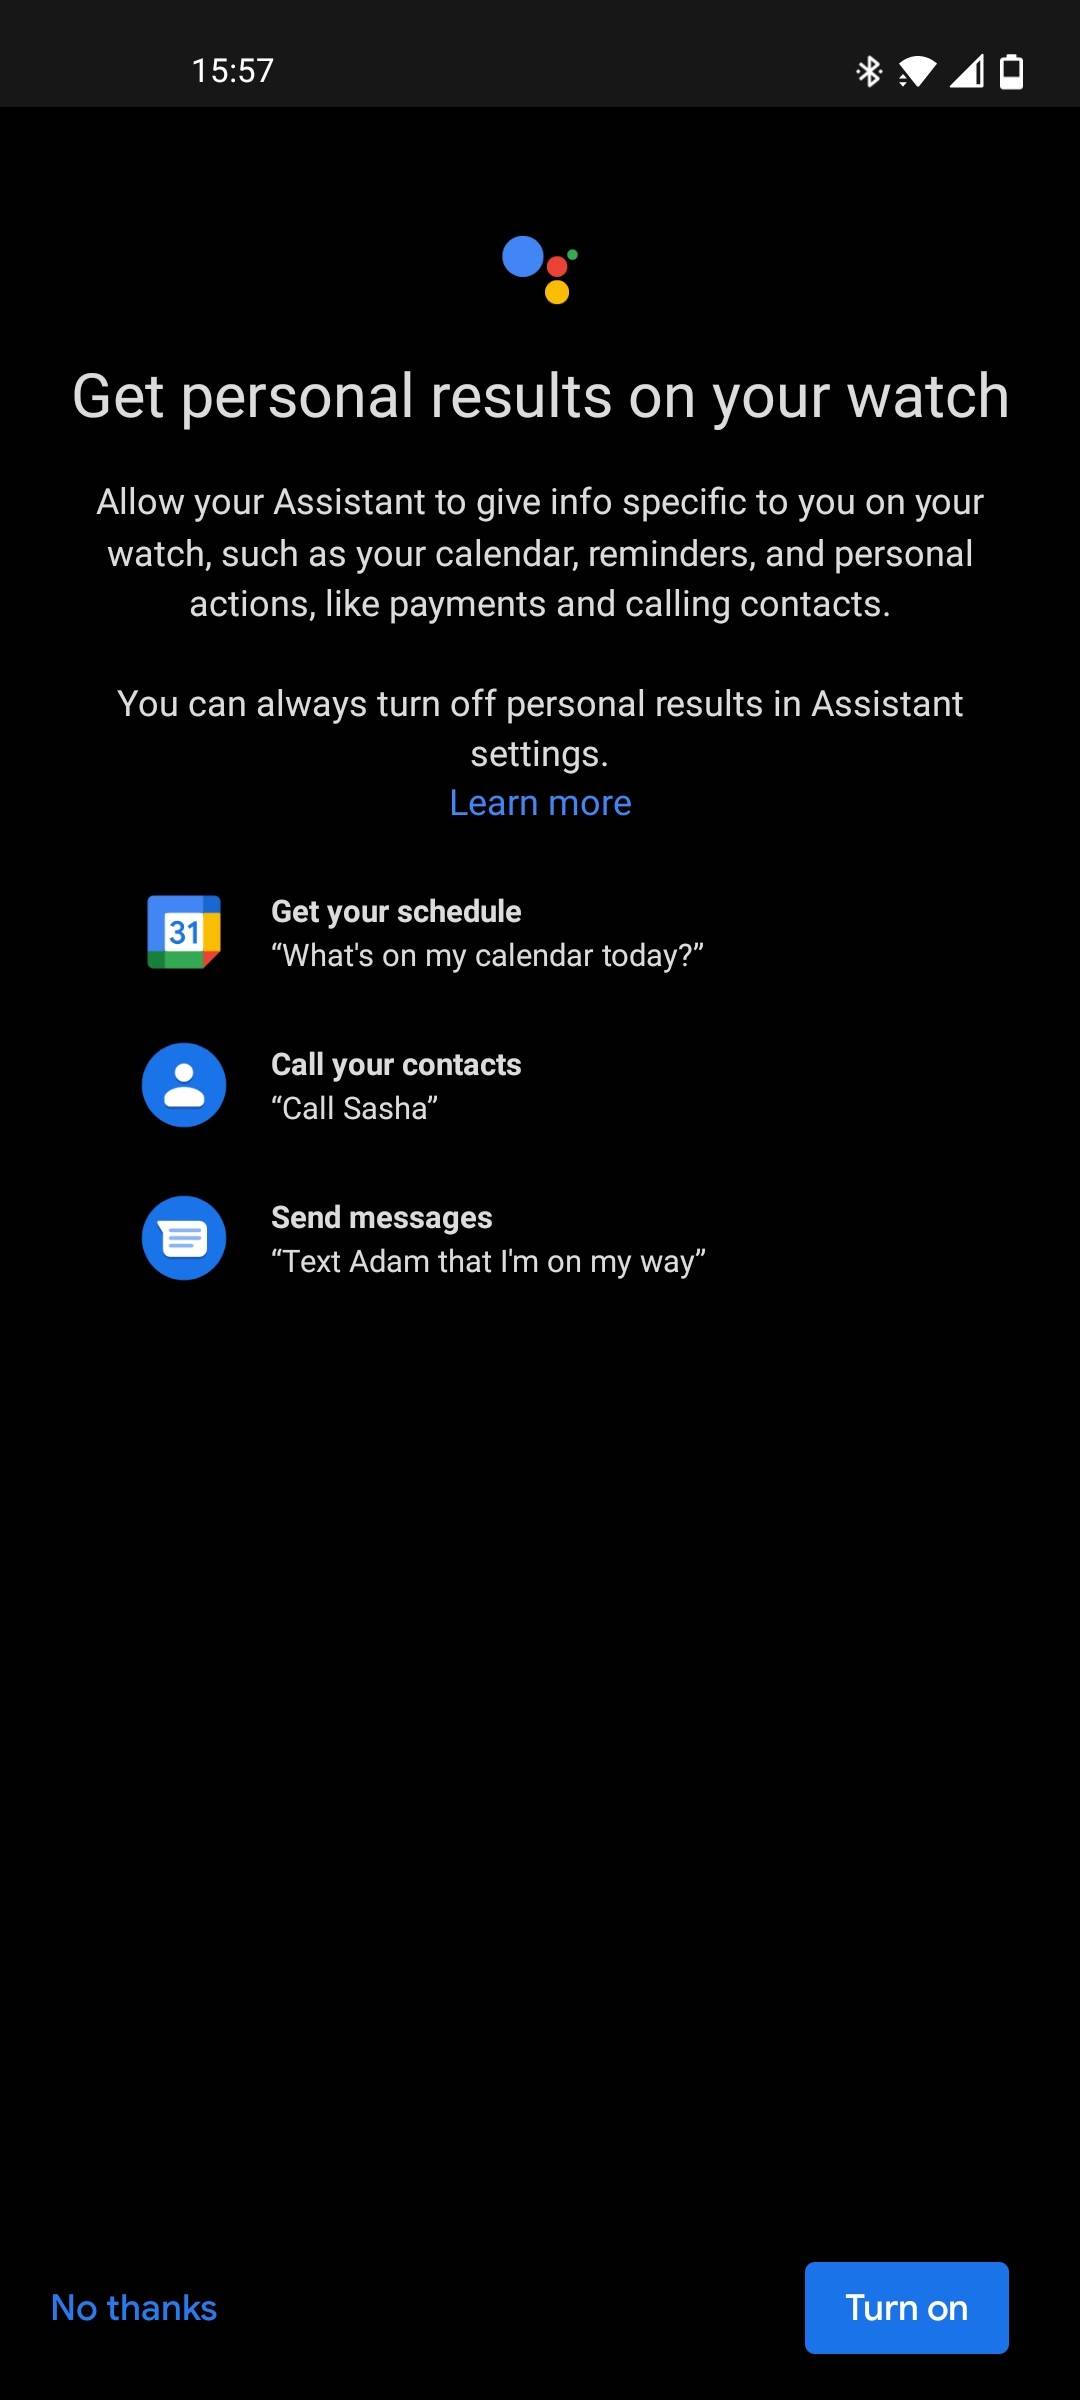 prompt asking whether you want personal results shown on the watch